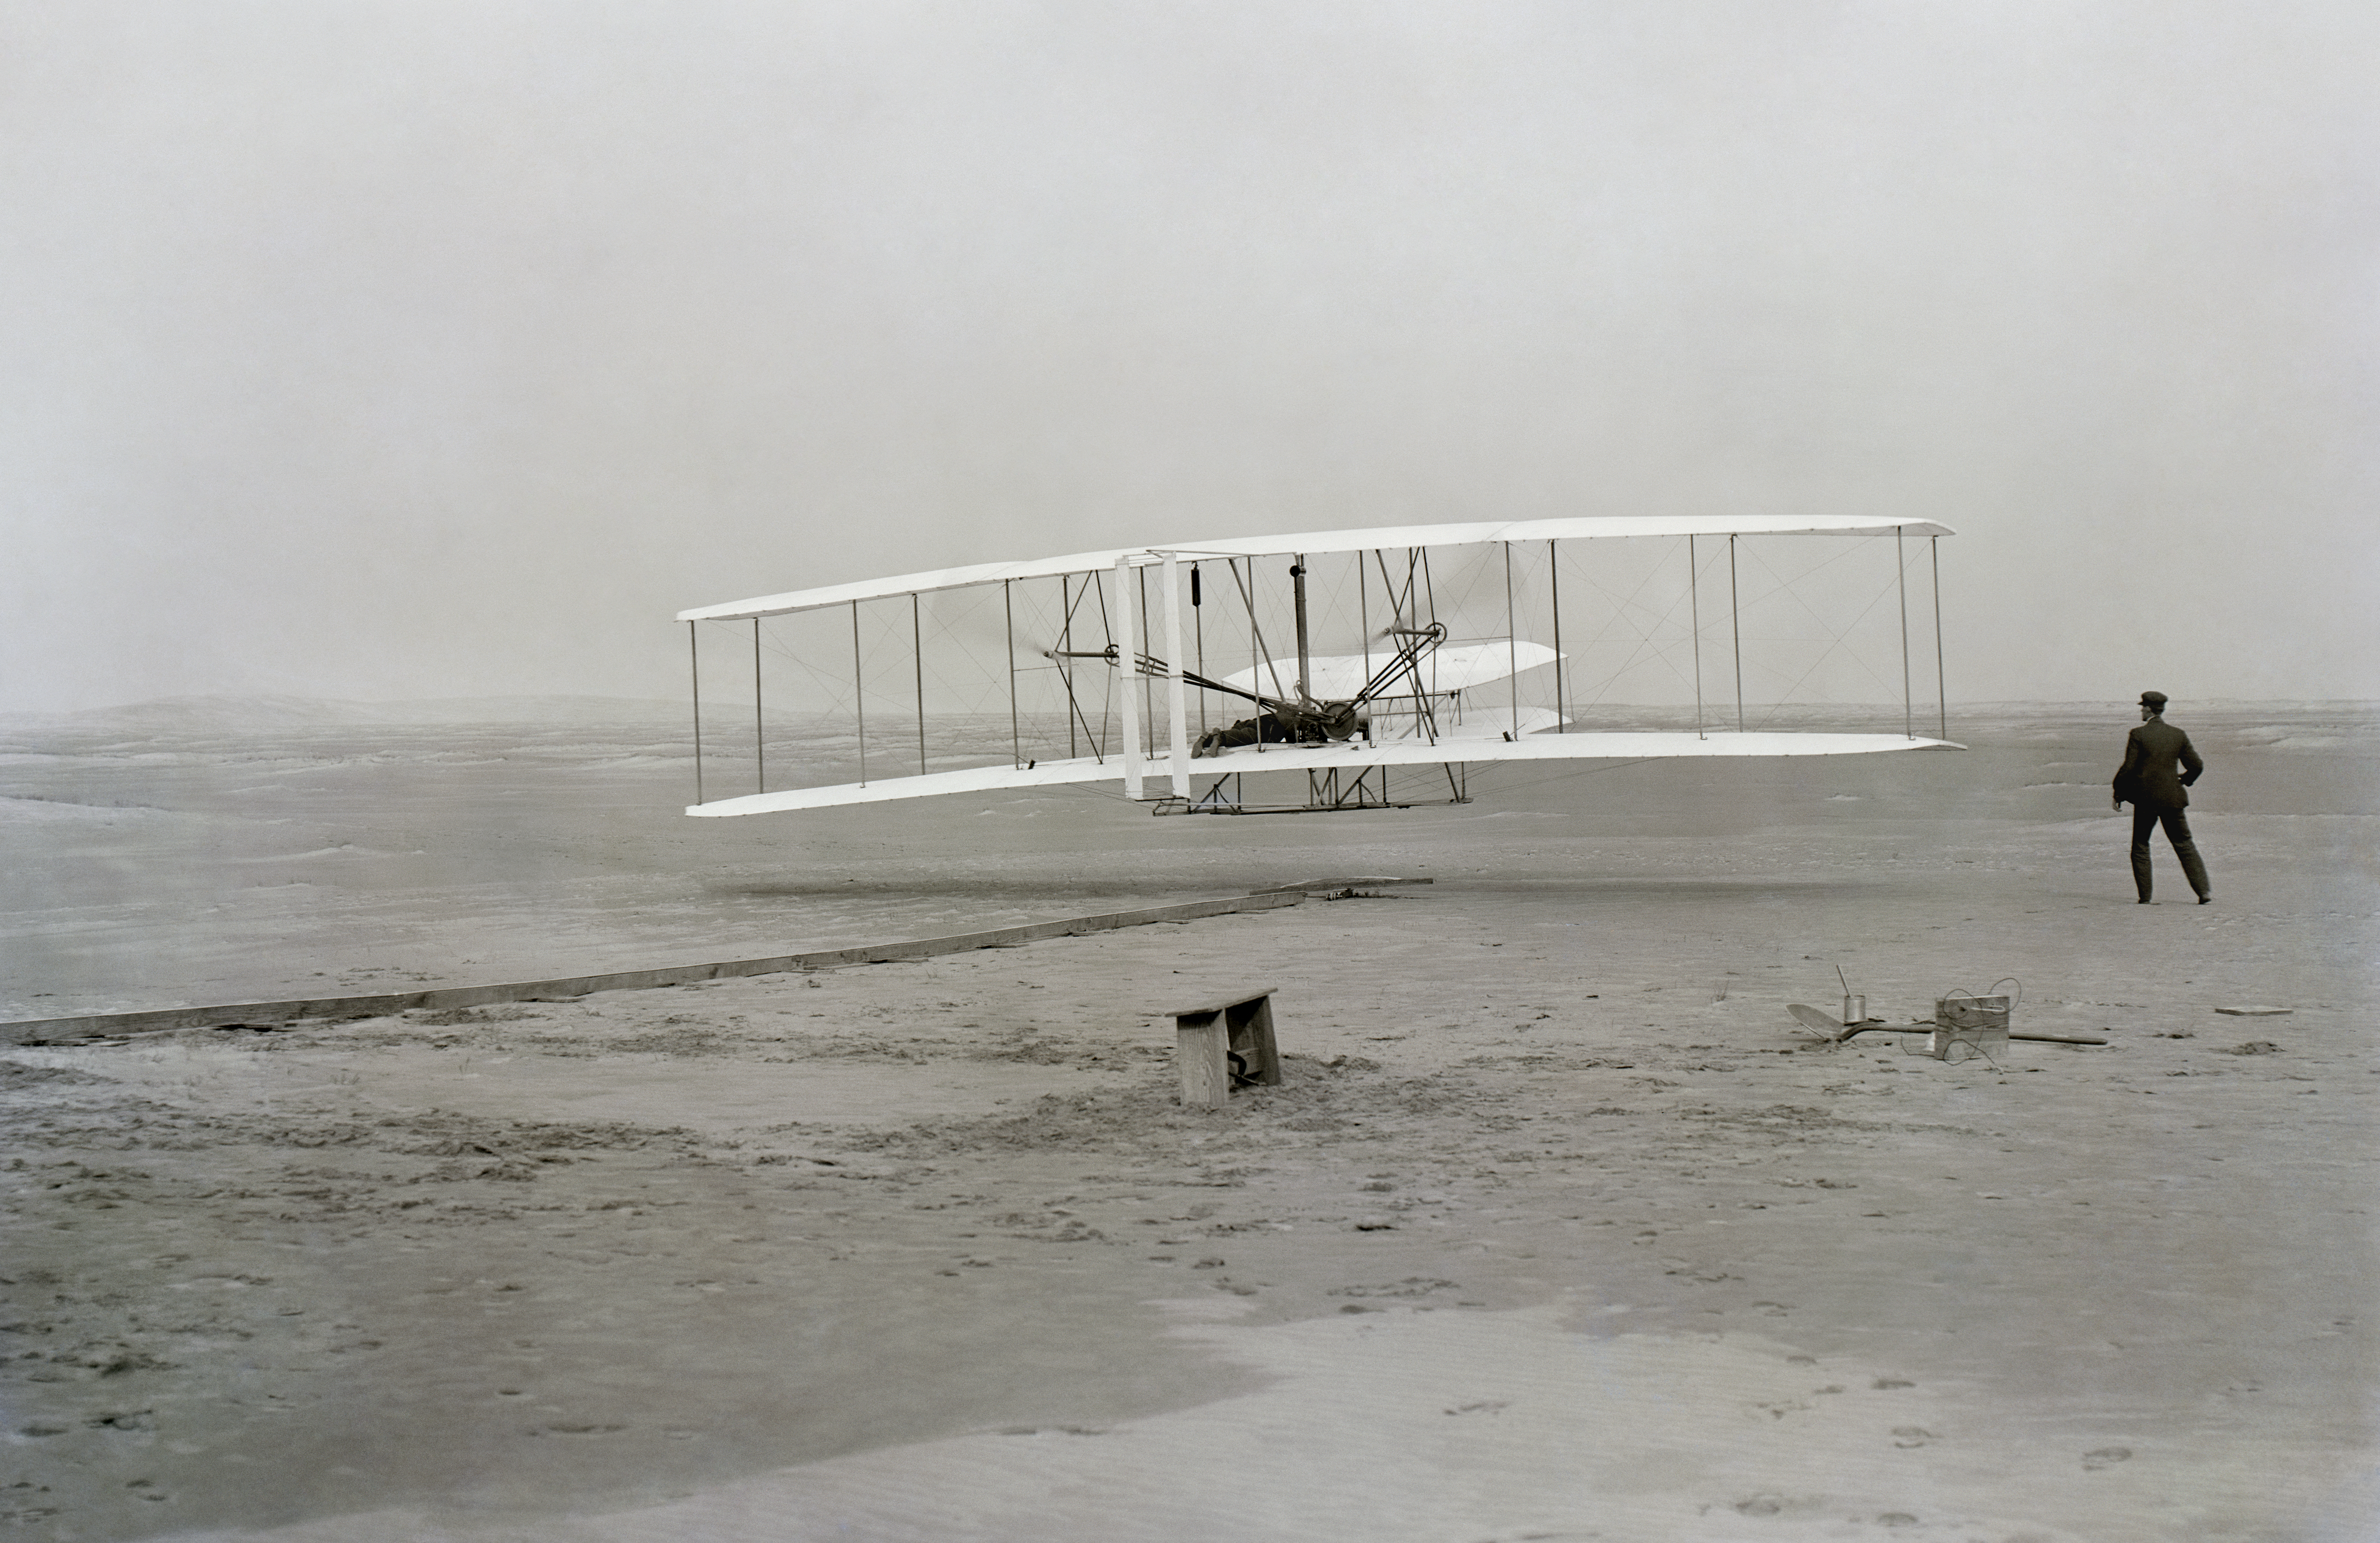 First successful flight of the Wright Flyer, by the Wright brothers. The machine traveled 120 ft (36.6 m) in 12 seconds at 10:35 a.m. at Kill Devil Hills, North Carolina. Orville Wright was at the controls of the machine, lying prone on the lower wing with his hips in the cradle which operated the wing-warping mechanism. Wilbur Wright ran alongside to balance the machine, and just released his hold on the forward upright of the right wing in the photo. The starting rail, the wing-rest, a coil box, and other items needed for flight preparation are visible behind the machine. This is described as 